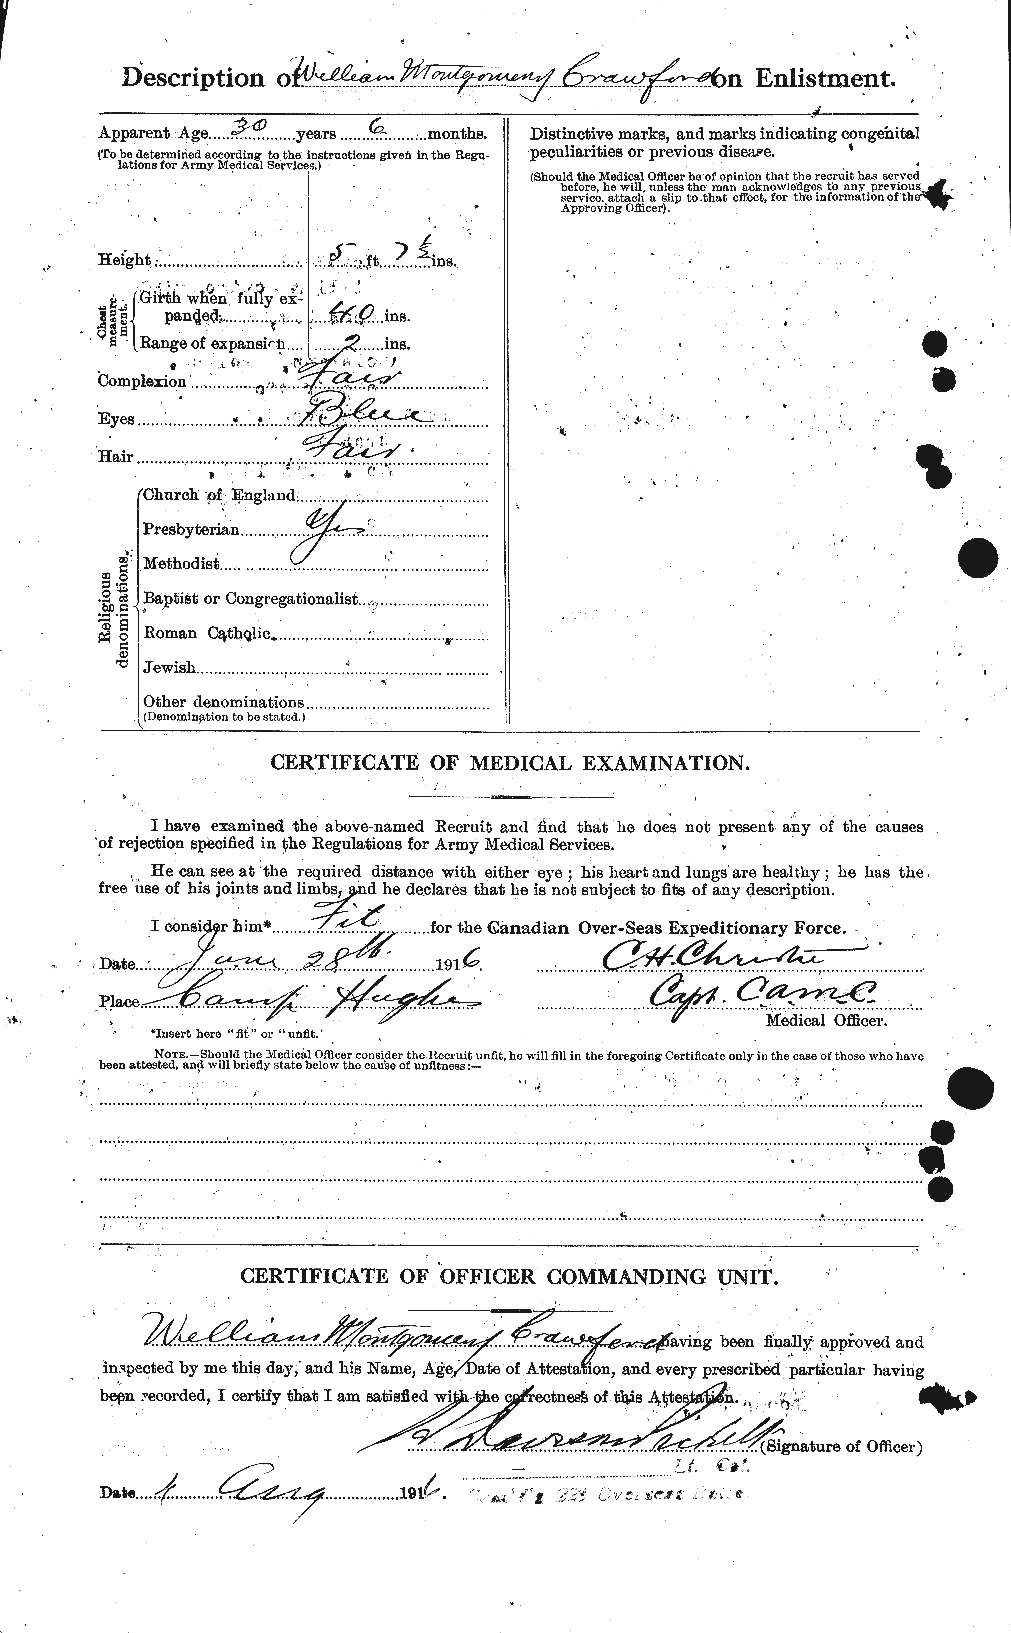 Personnel Records of the First World War - CEF 060692b